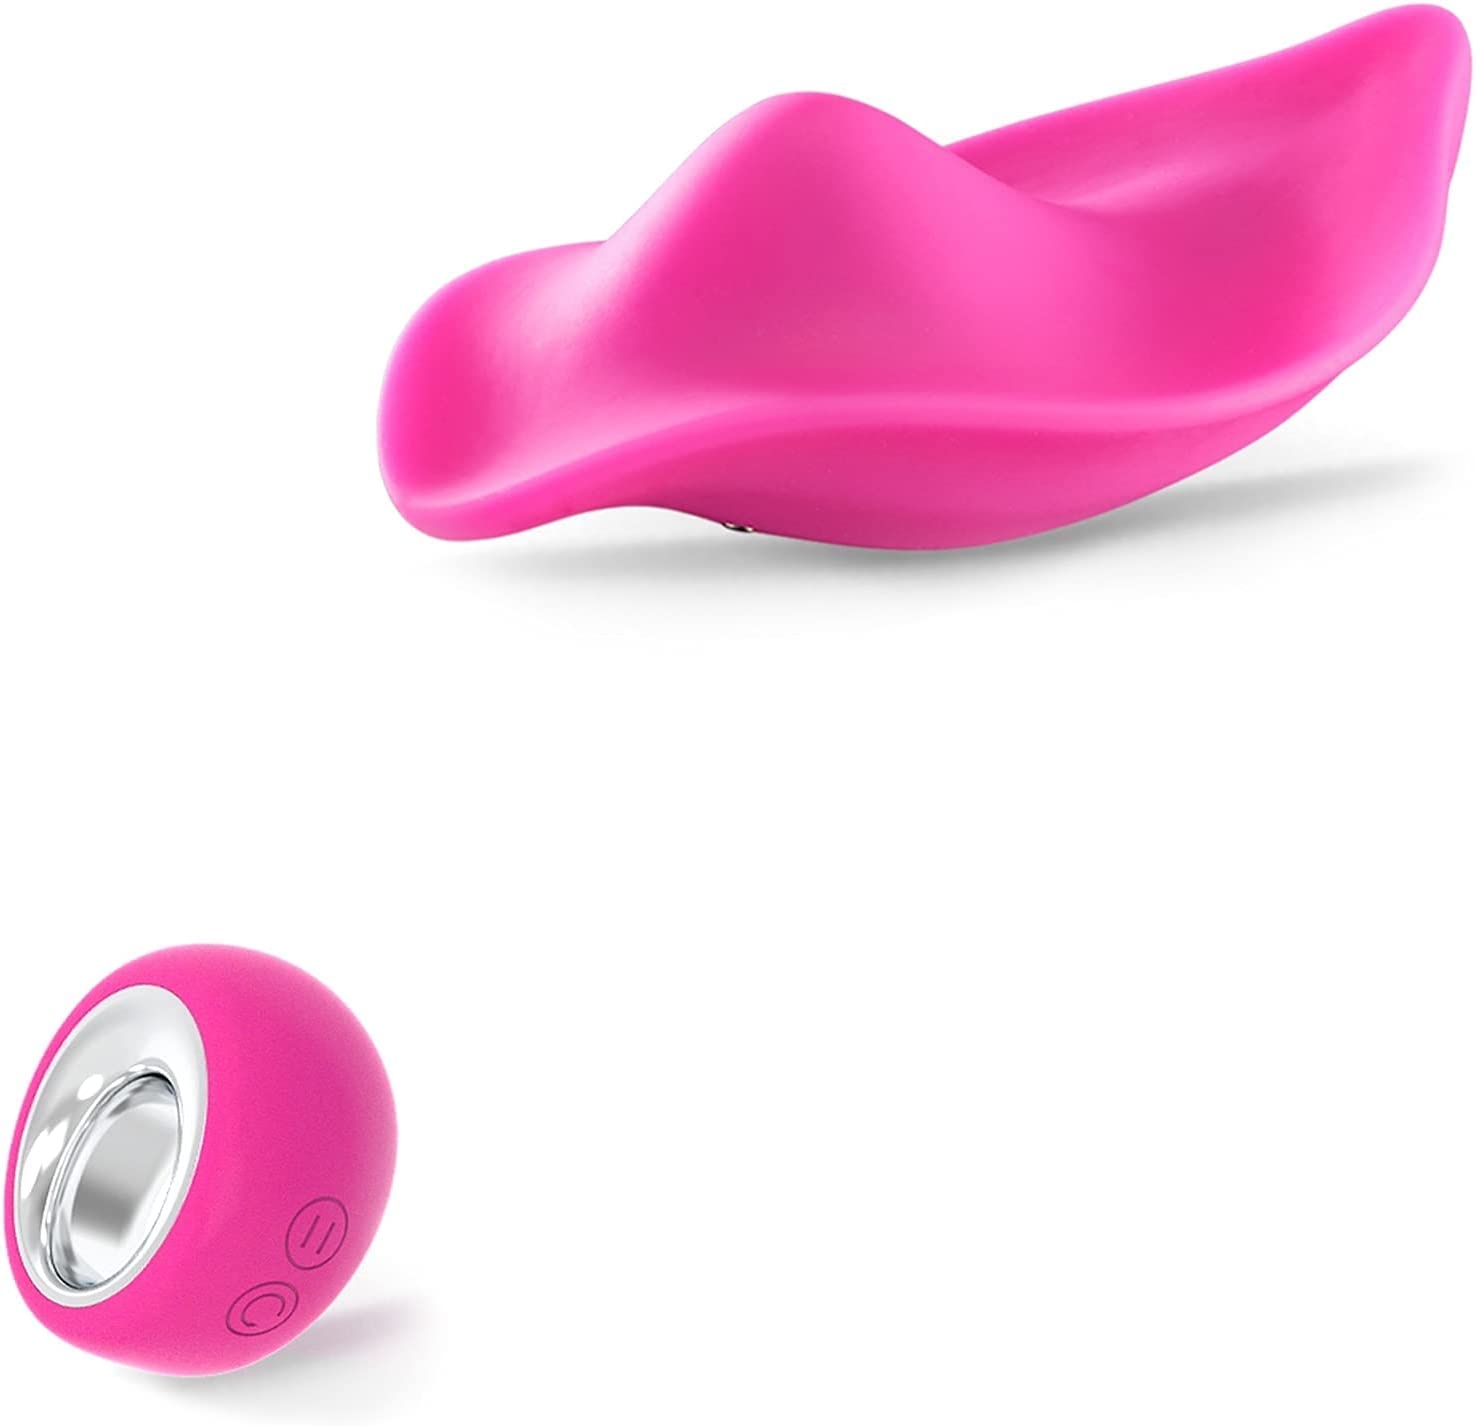 Adult Sex Toys -  Wearable Panty Invisible Clitoral Stimulator for Couples with Wireless Remote